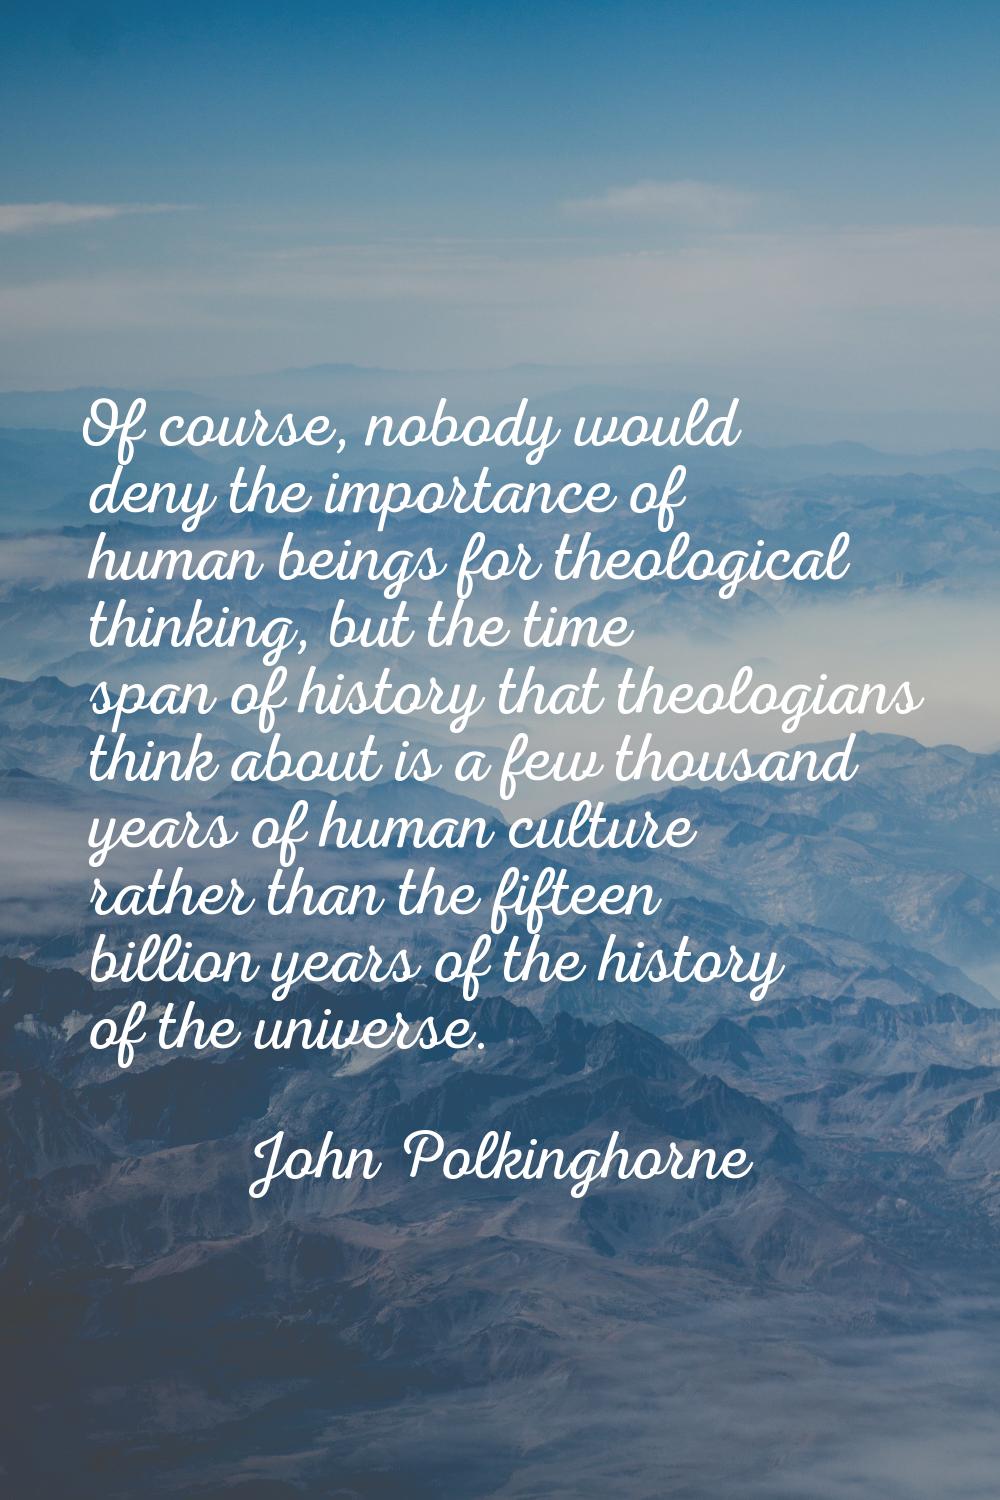 Of course, nobody would deny the importance of human beings for theological thinking, but the time 